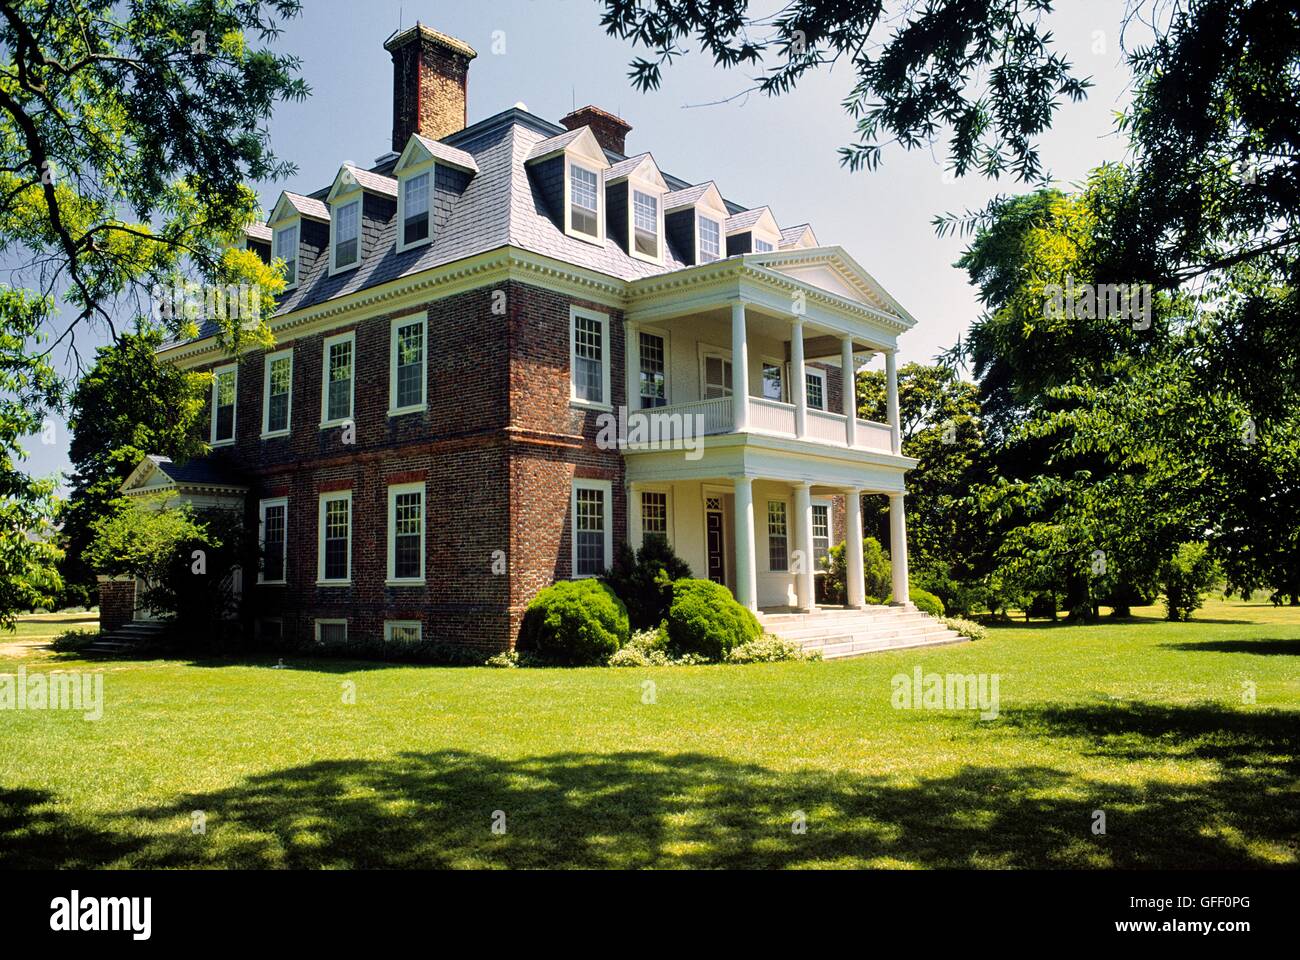 The Shirley Plantation House. Home of mother of president Robert E Lee on the James River southeast of Richmond, Virginia, USA Stock Photo